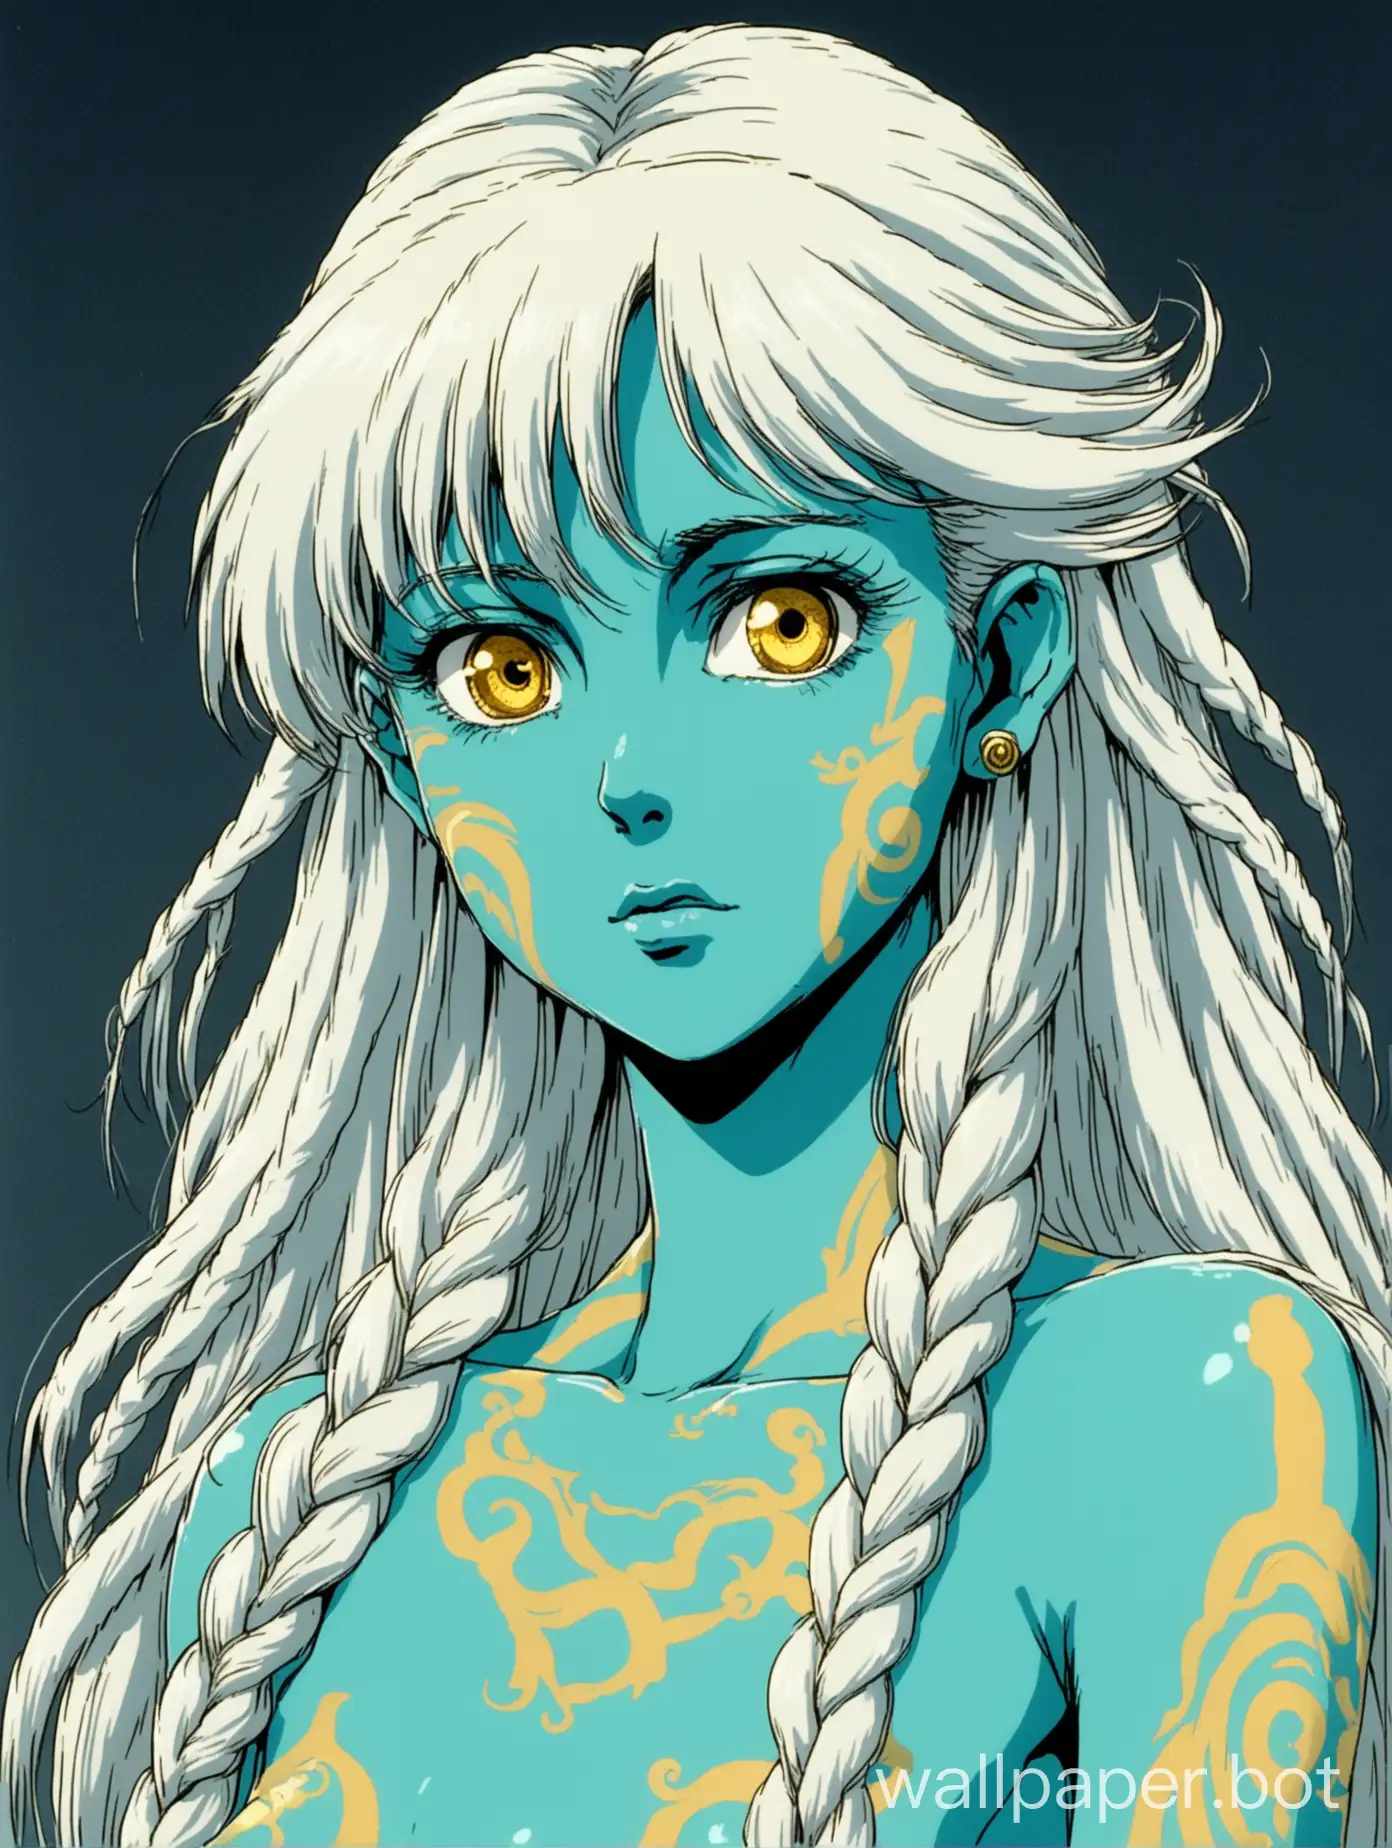 1980s-Retro-Anime-Portrait-CyanSkinned-Young-Woman-with-Unique-Features